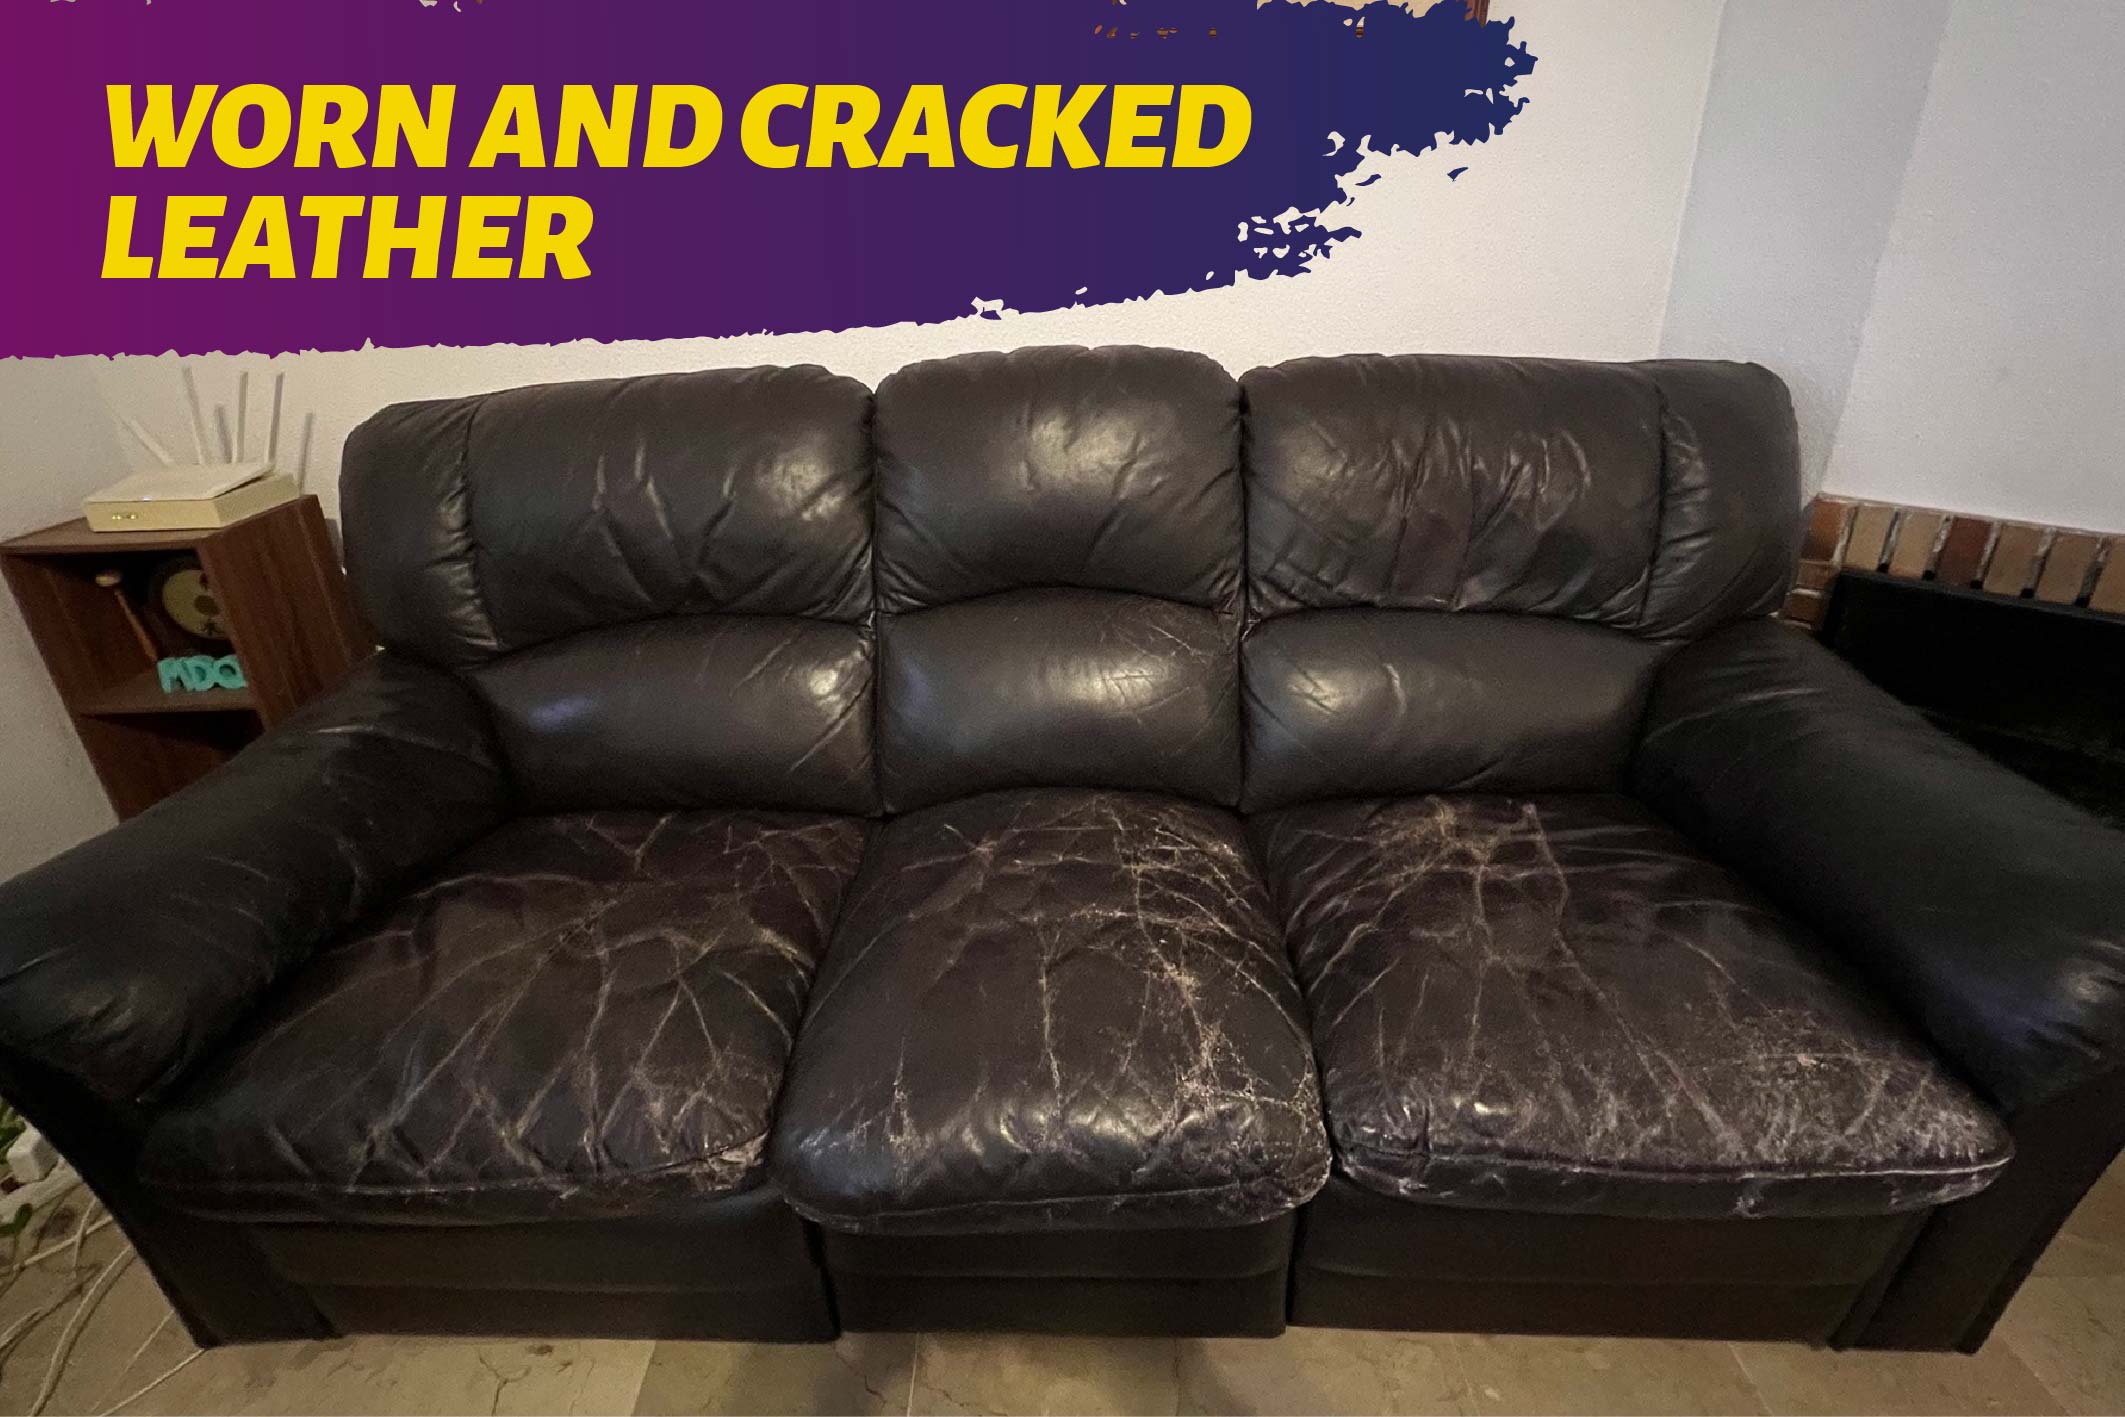 Added leather honey conditioner to middle couch, ruined it. All the cracks  are black, and it's extremely rough. How can I fix it? : r/fixit